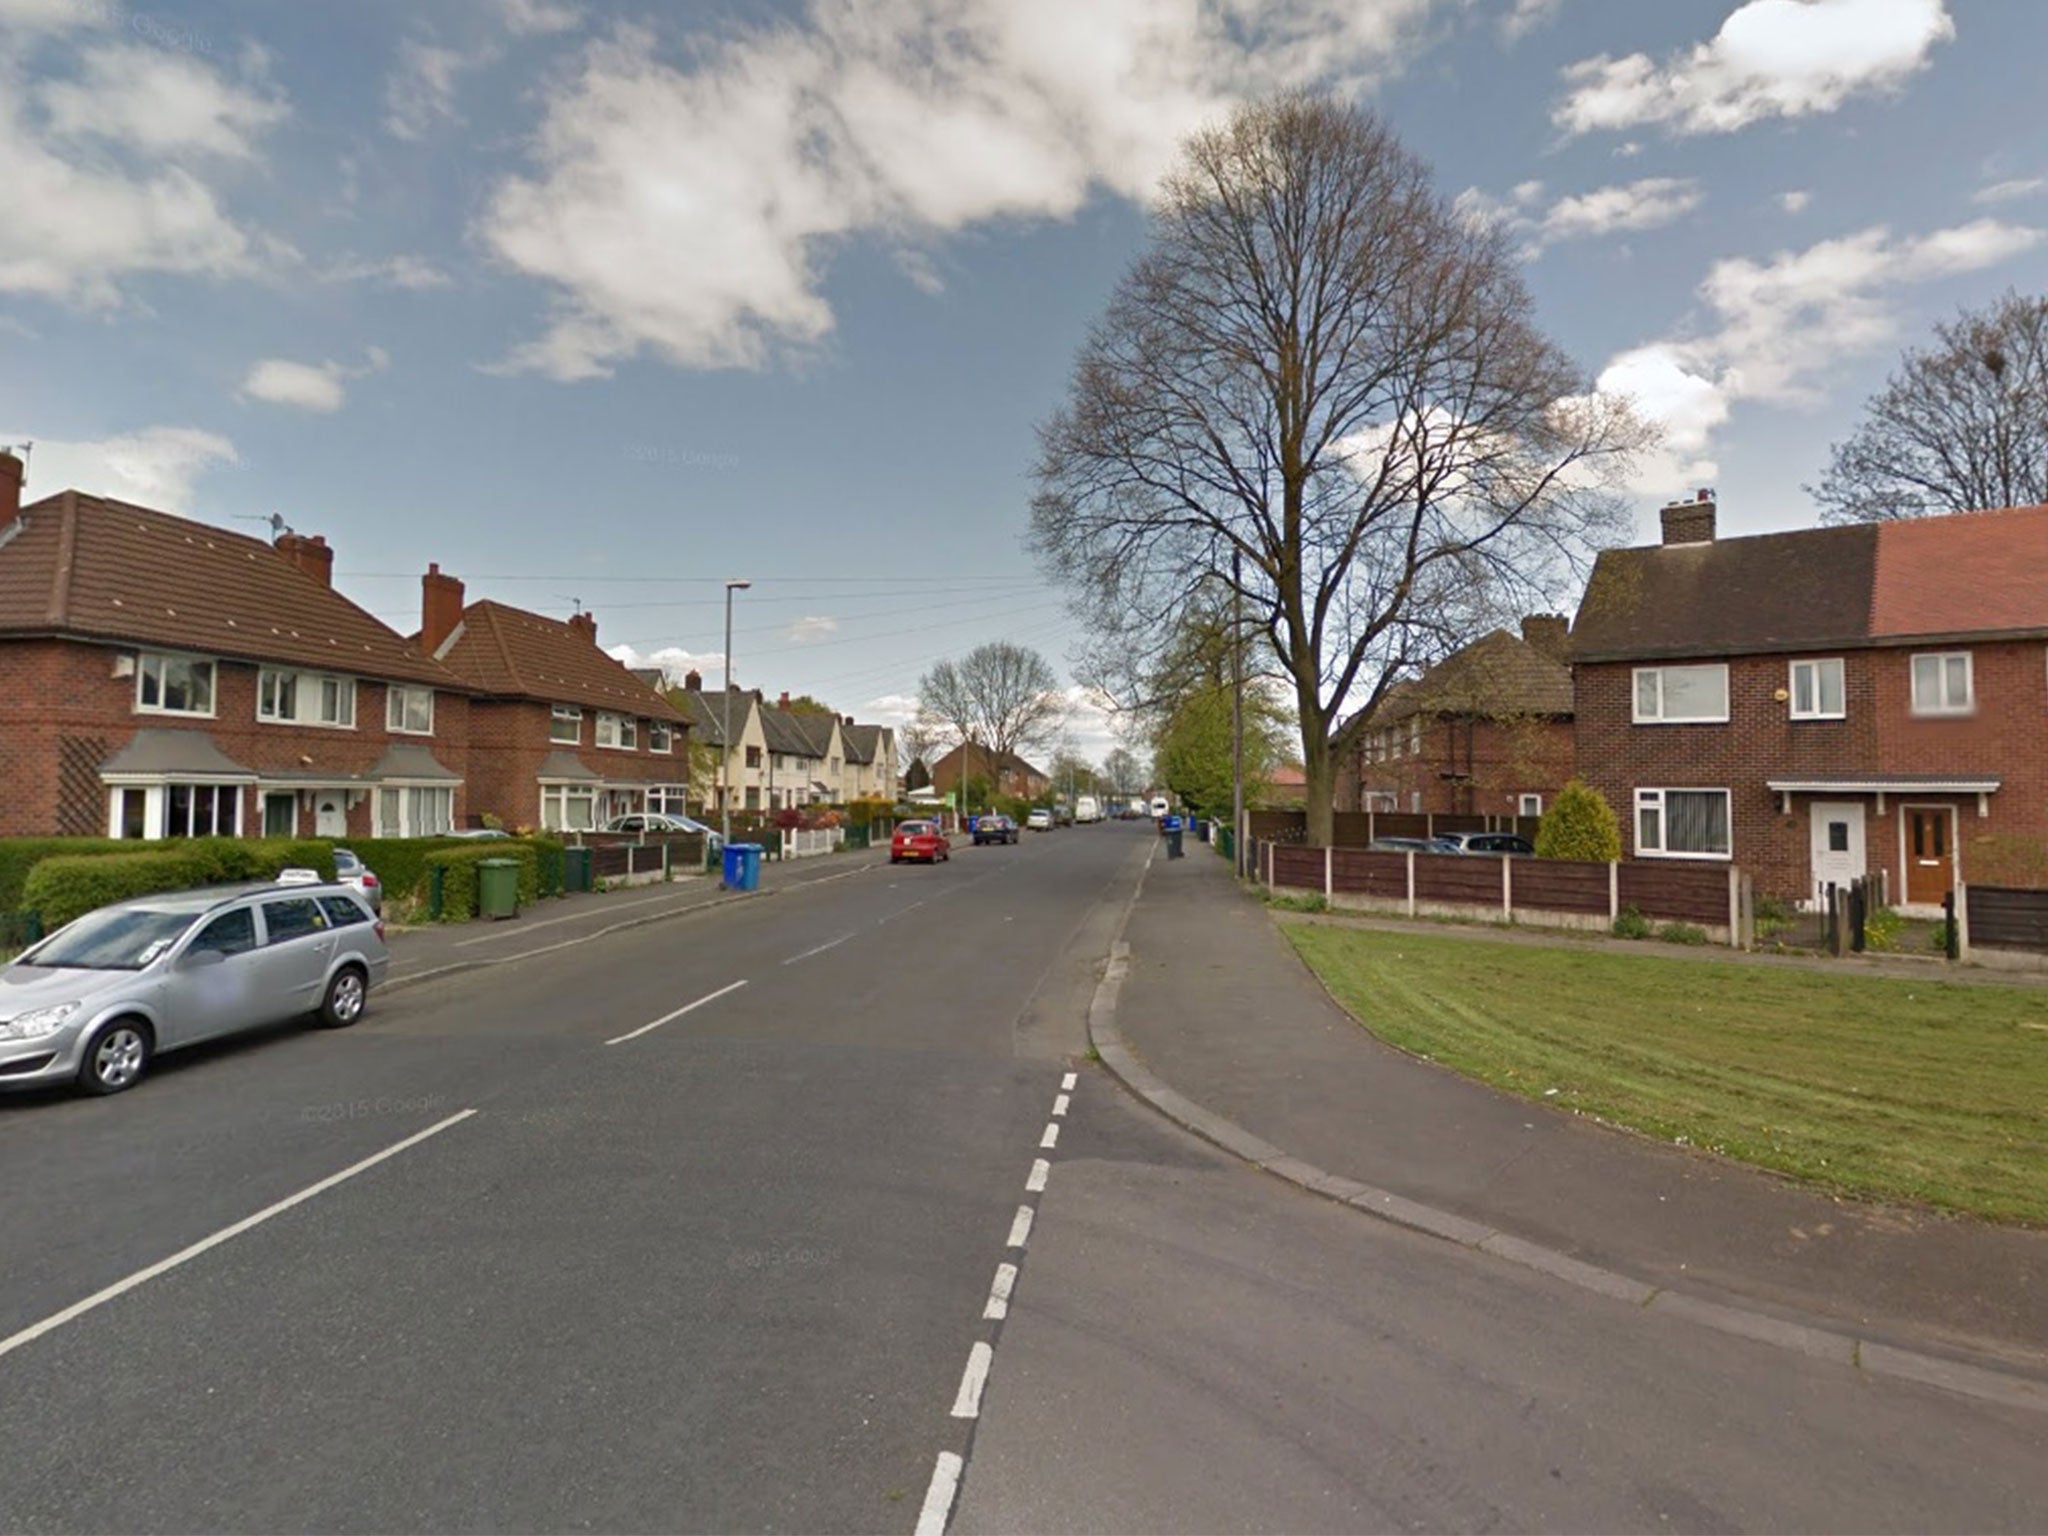 The 20-year-old victim was found seriously injured at a property in Crossacres Road, Wythenshawe